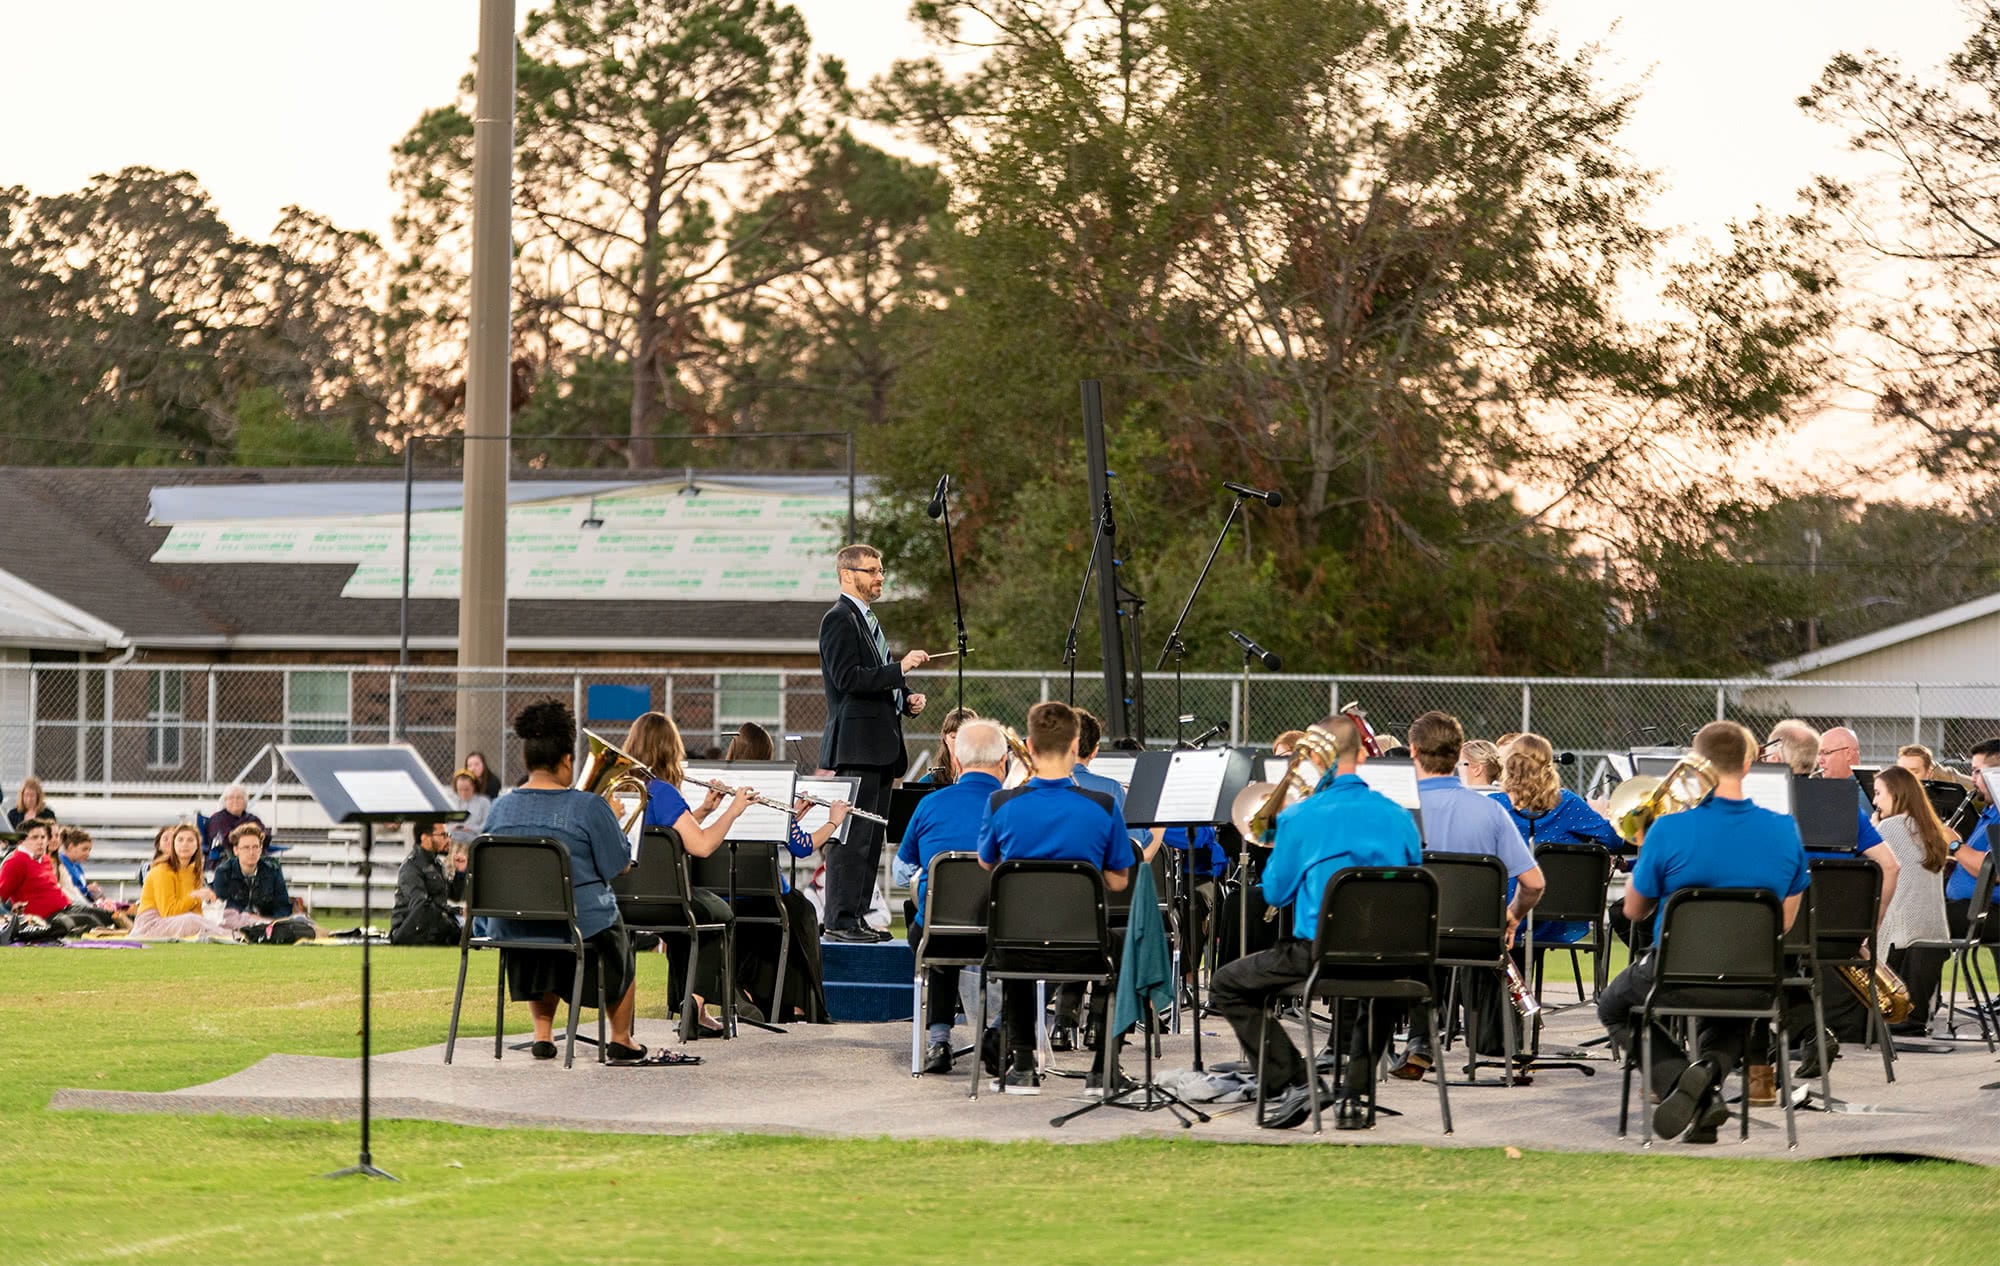 The Symphonic Band performing at the annual Concert on the Green.